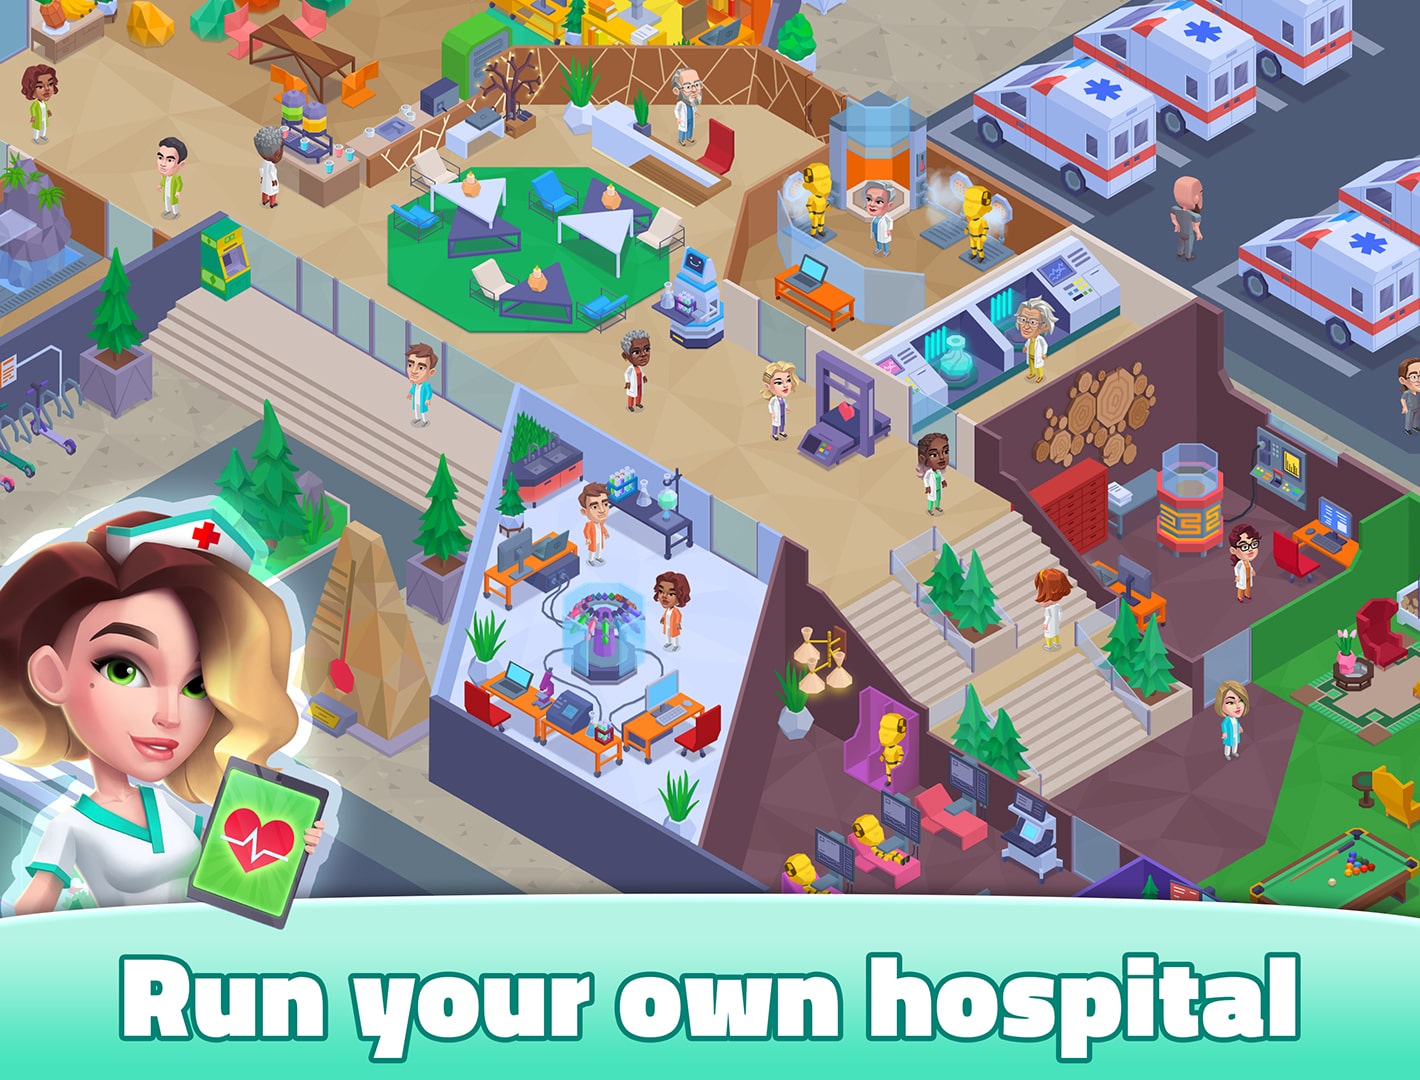 My Dream Hospital - Free Play & No Download